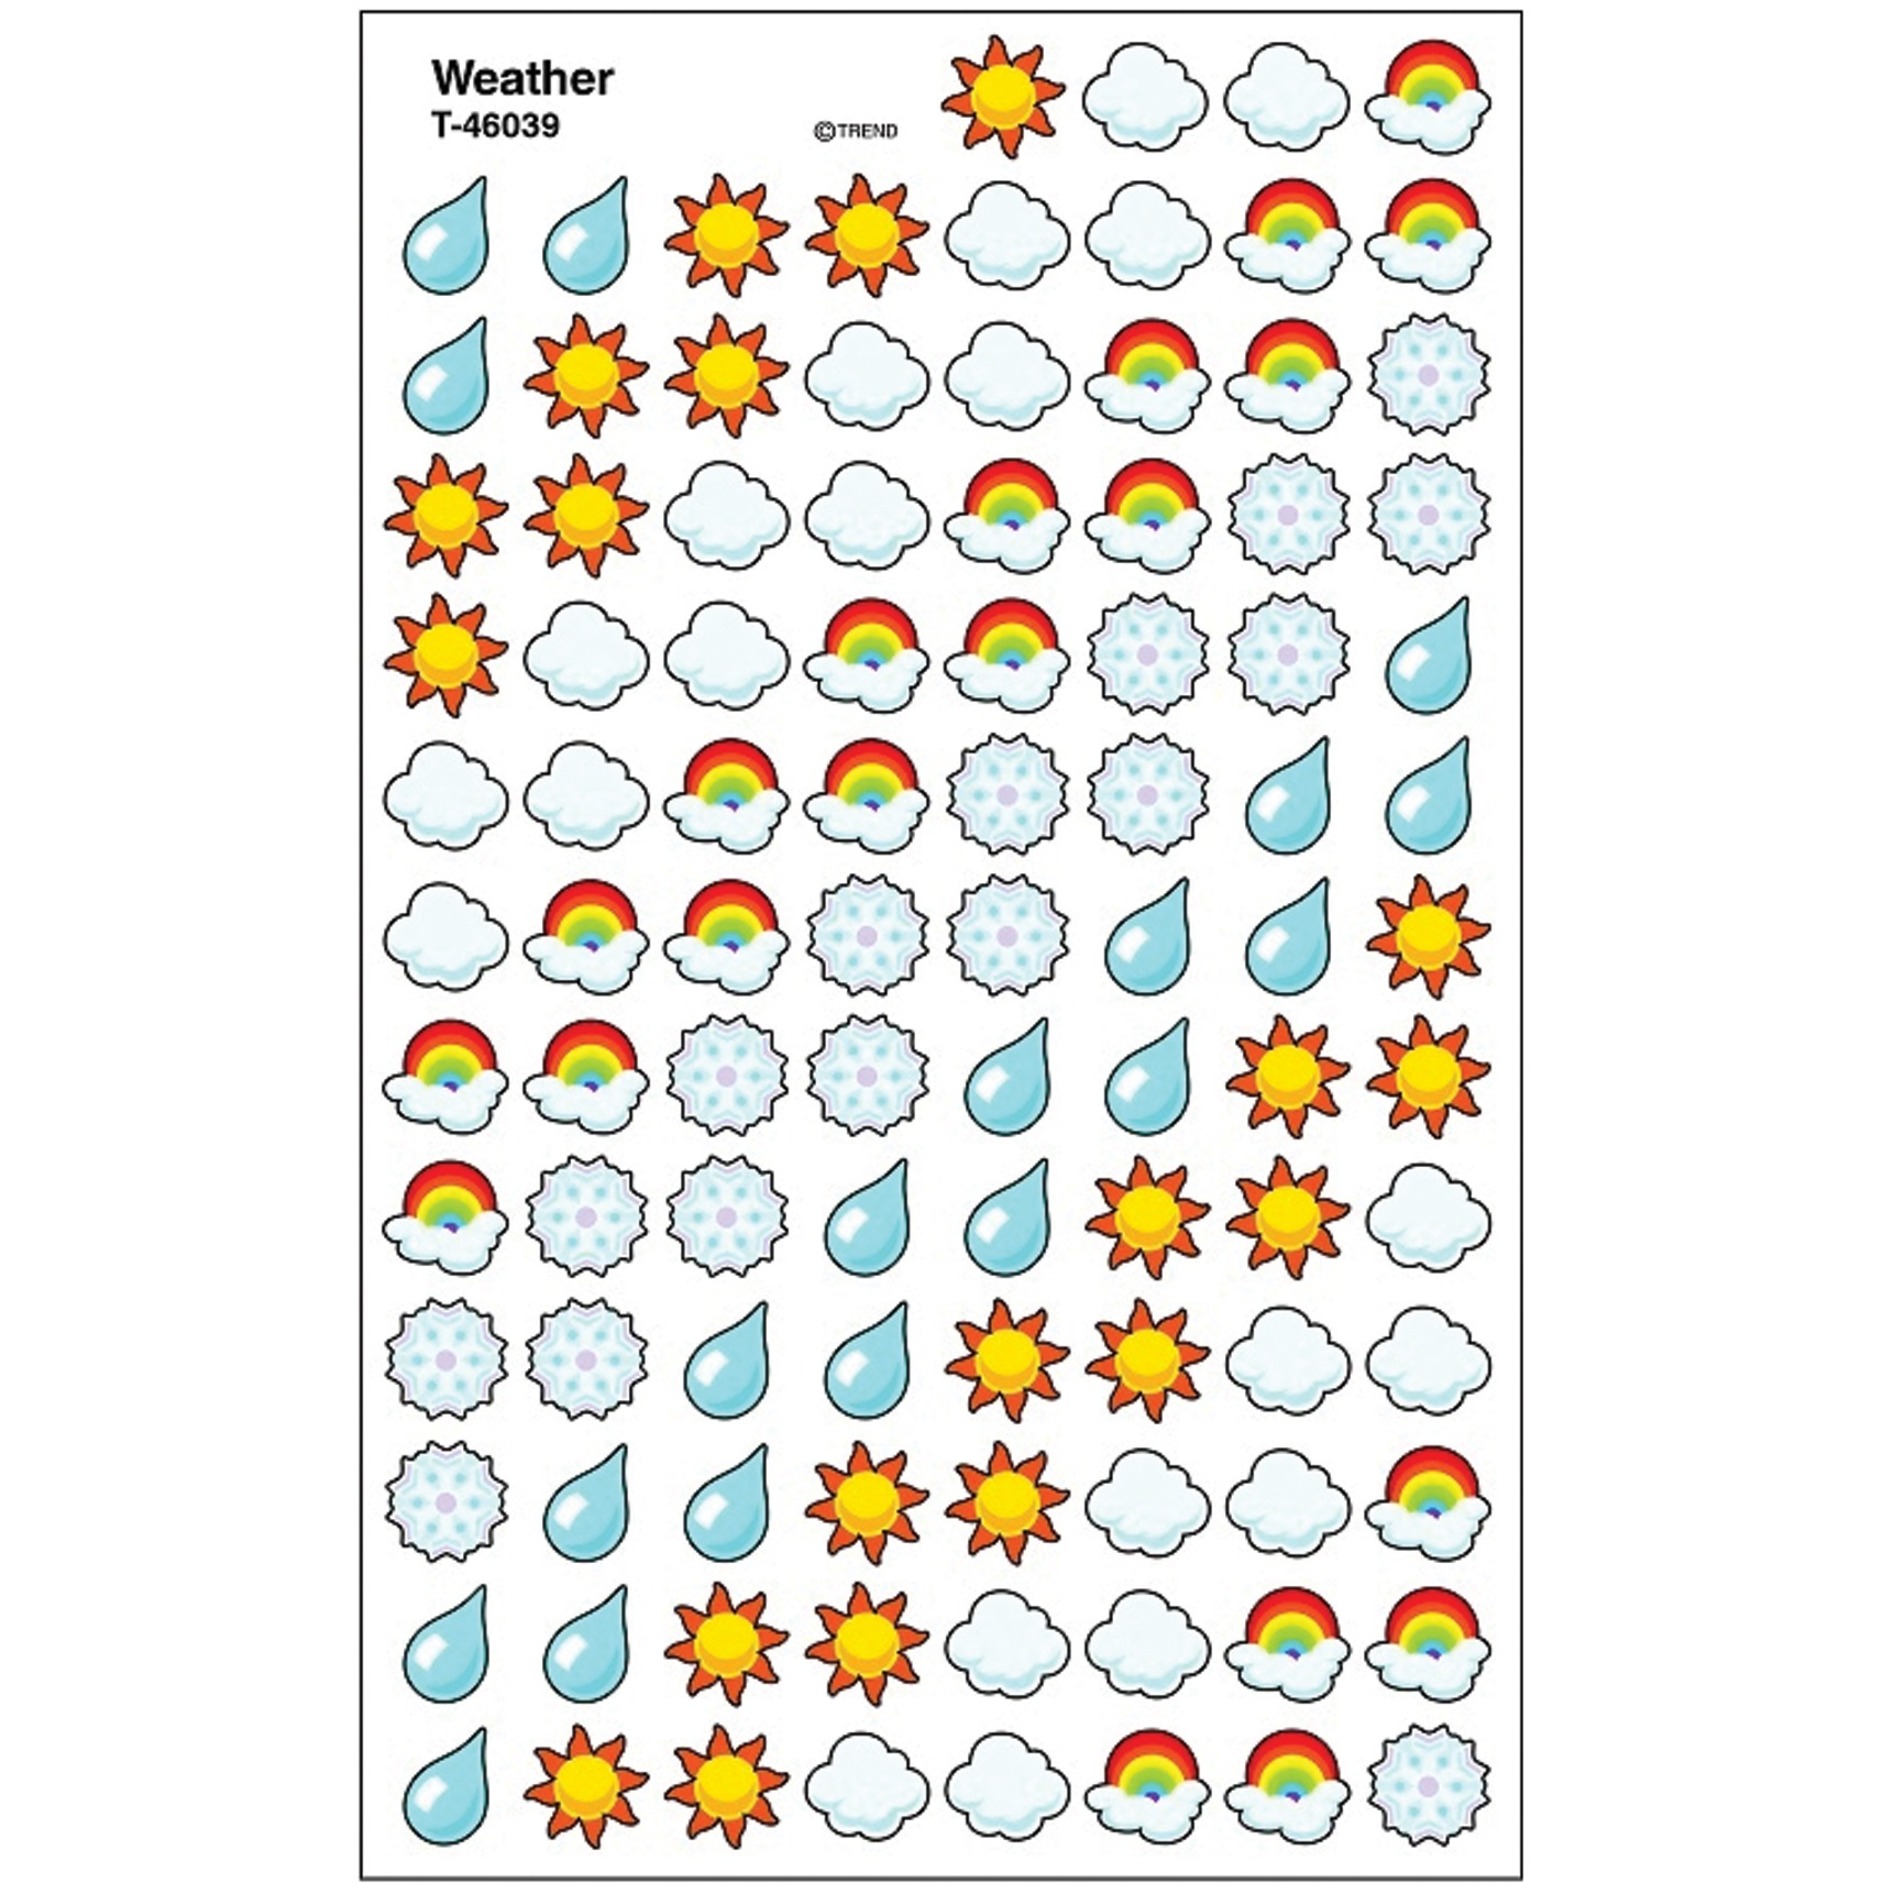 Trend Weather superShapes Stickers - image 1 of 2